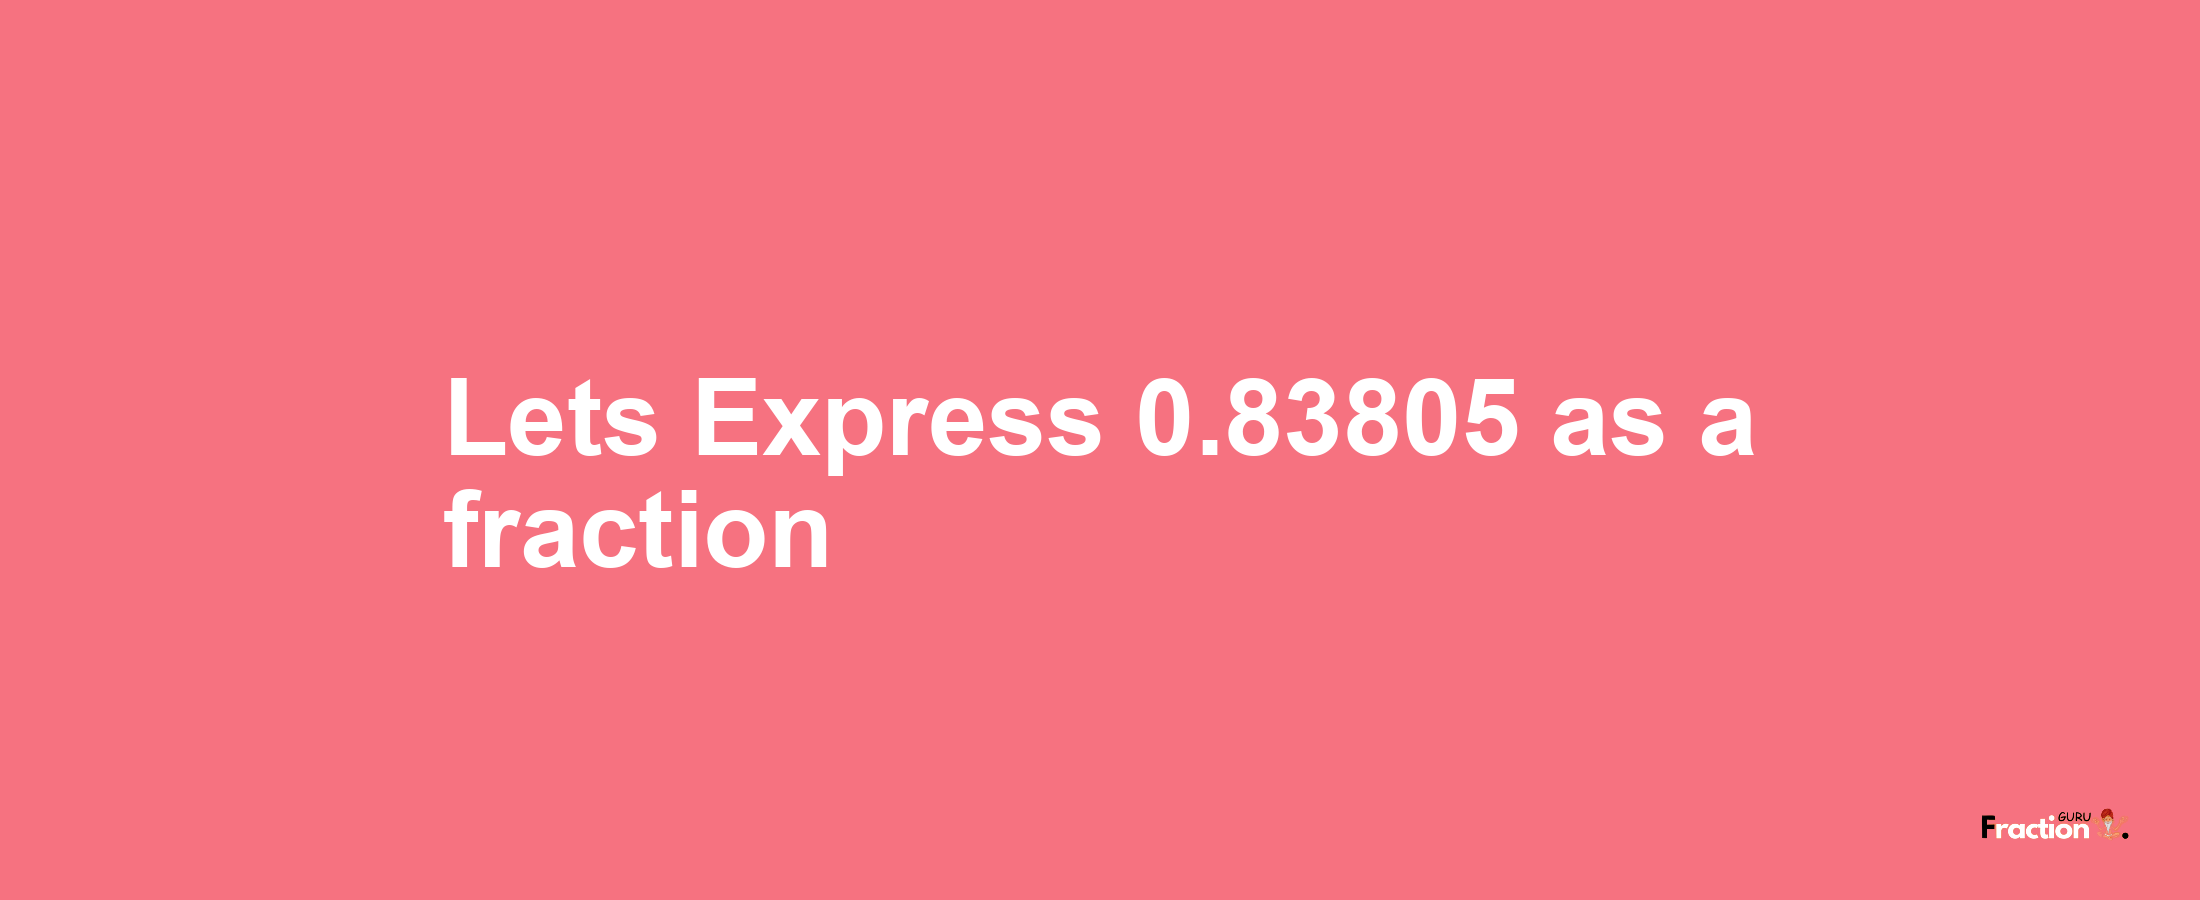 Lets Express 0.83805 as afraction